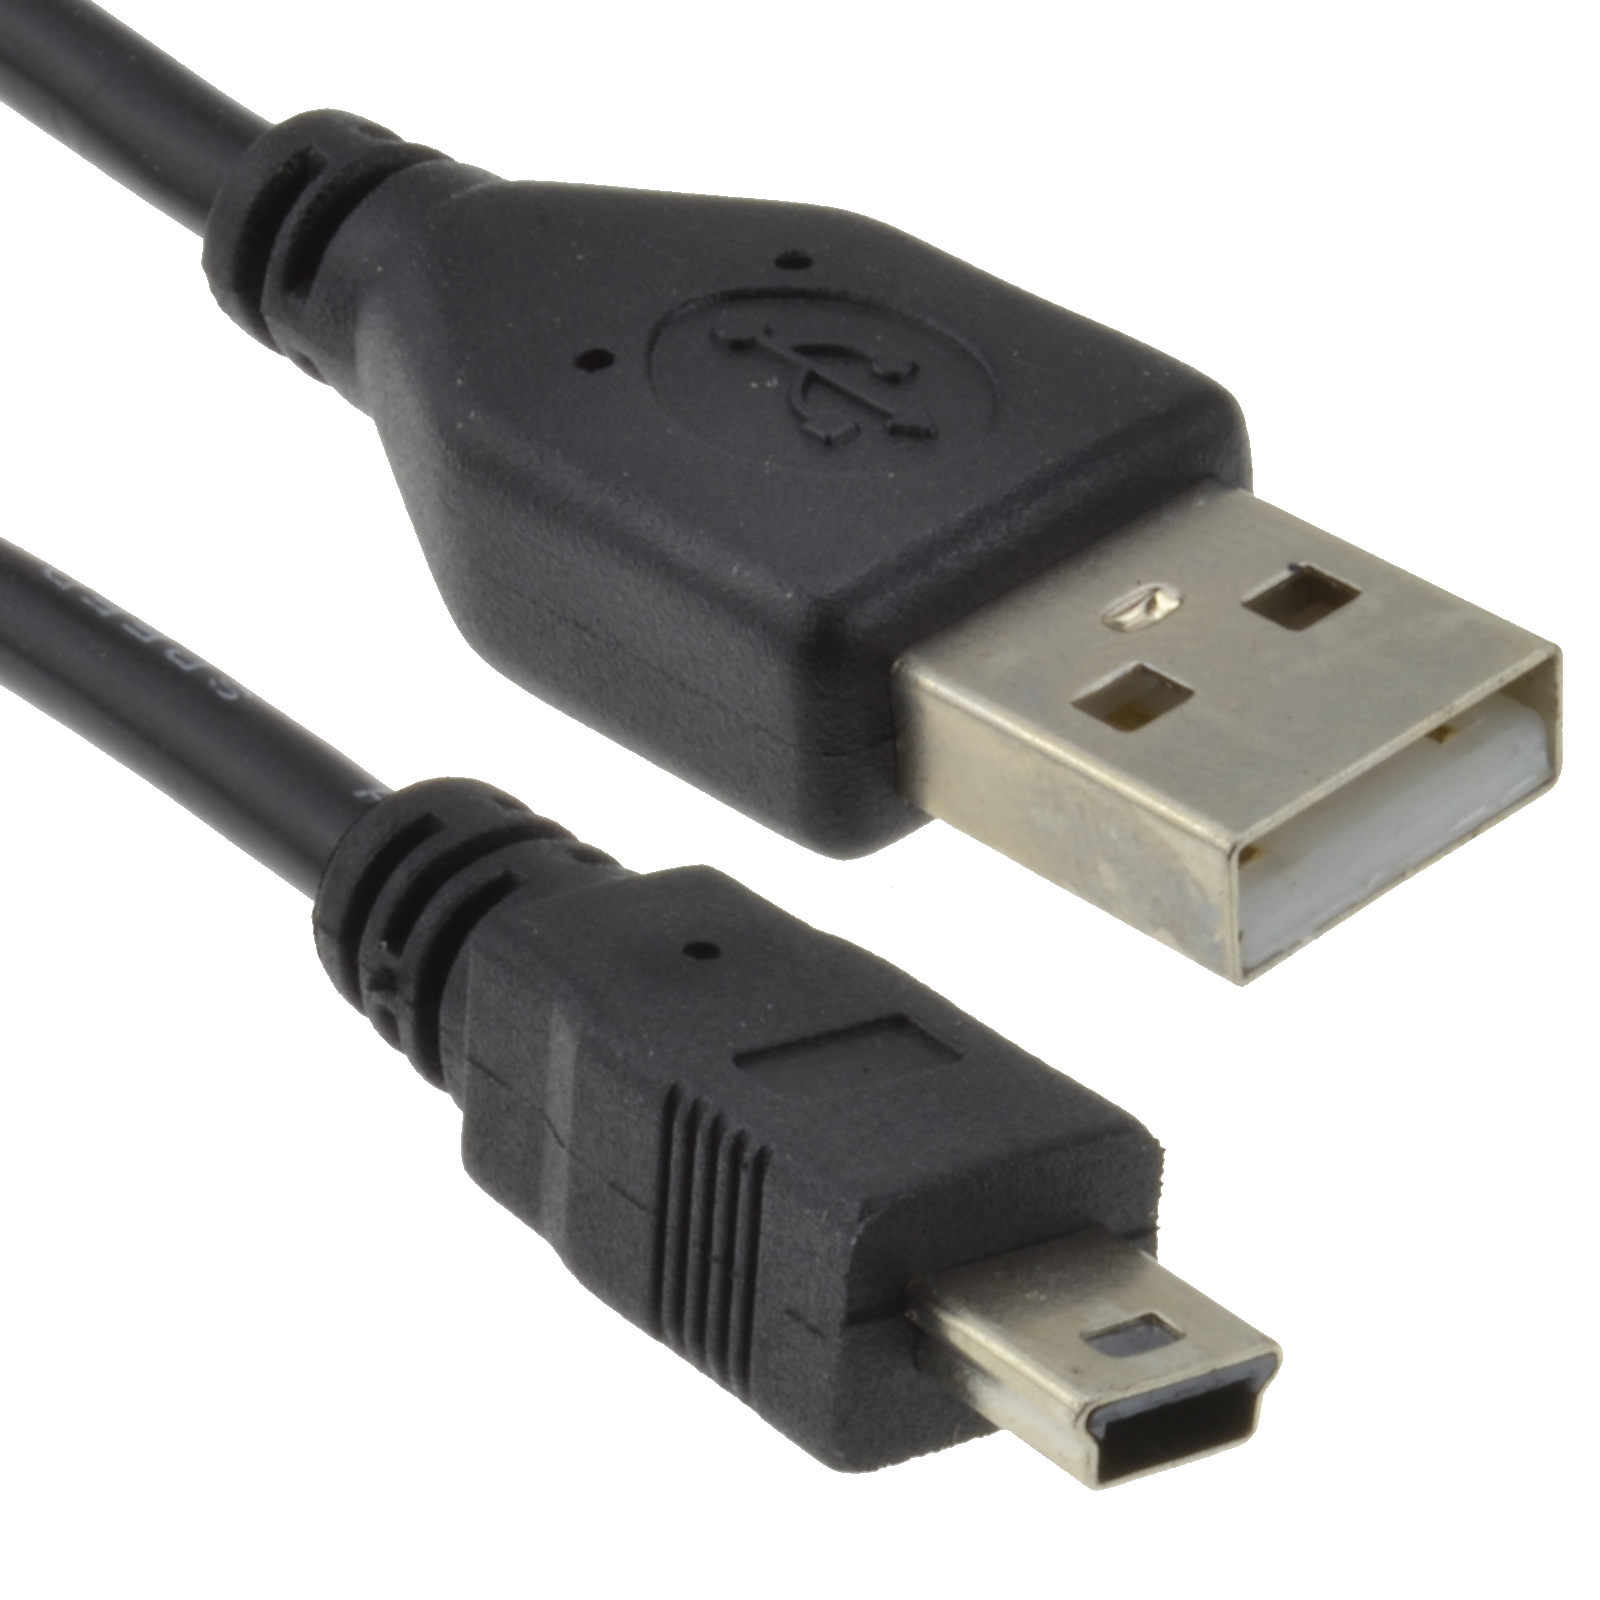 USB 2.0 Hi-Speed A to mini-B 5 pin Cable Power & Data Lead 0.15m ...